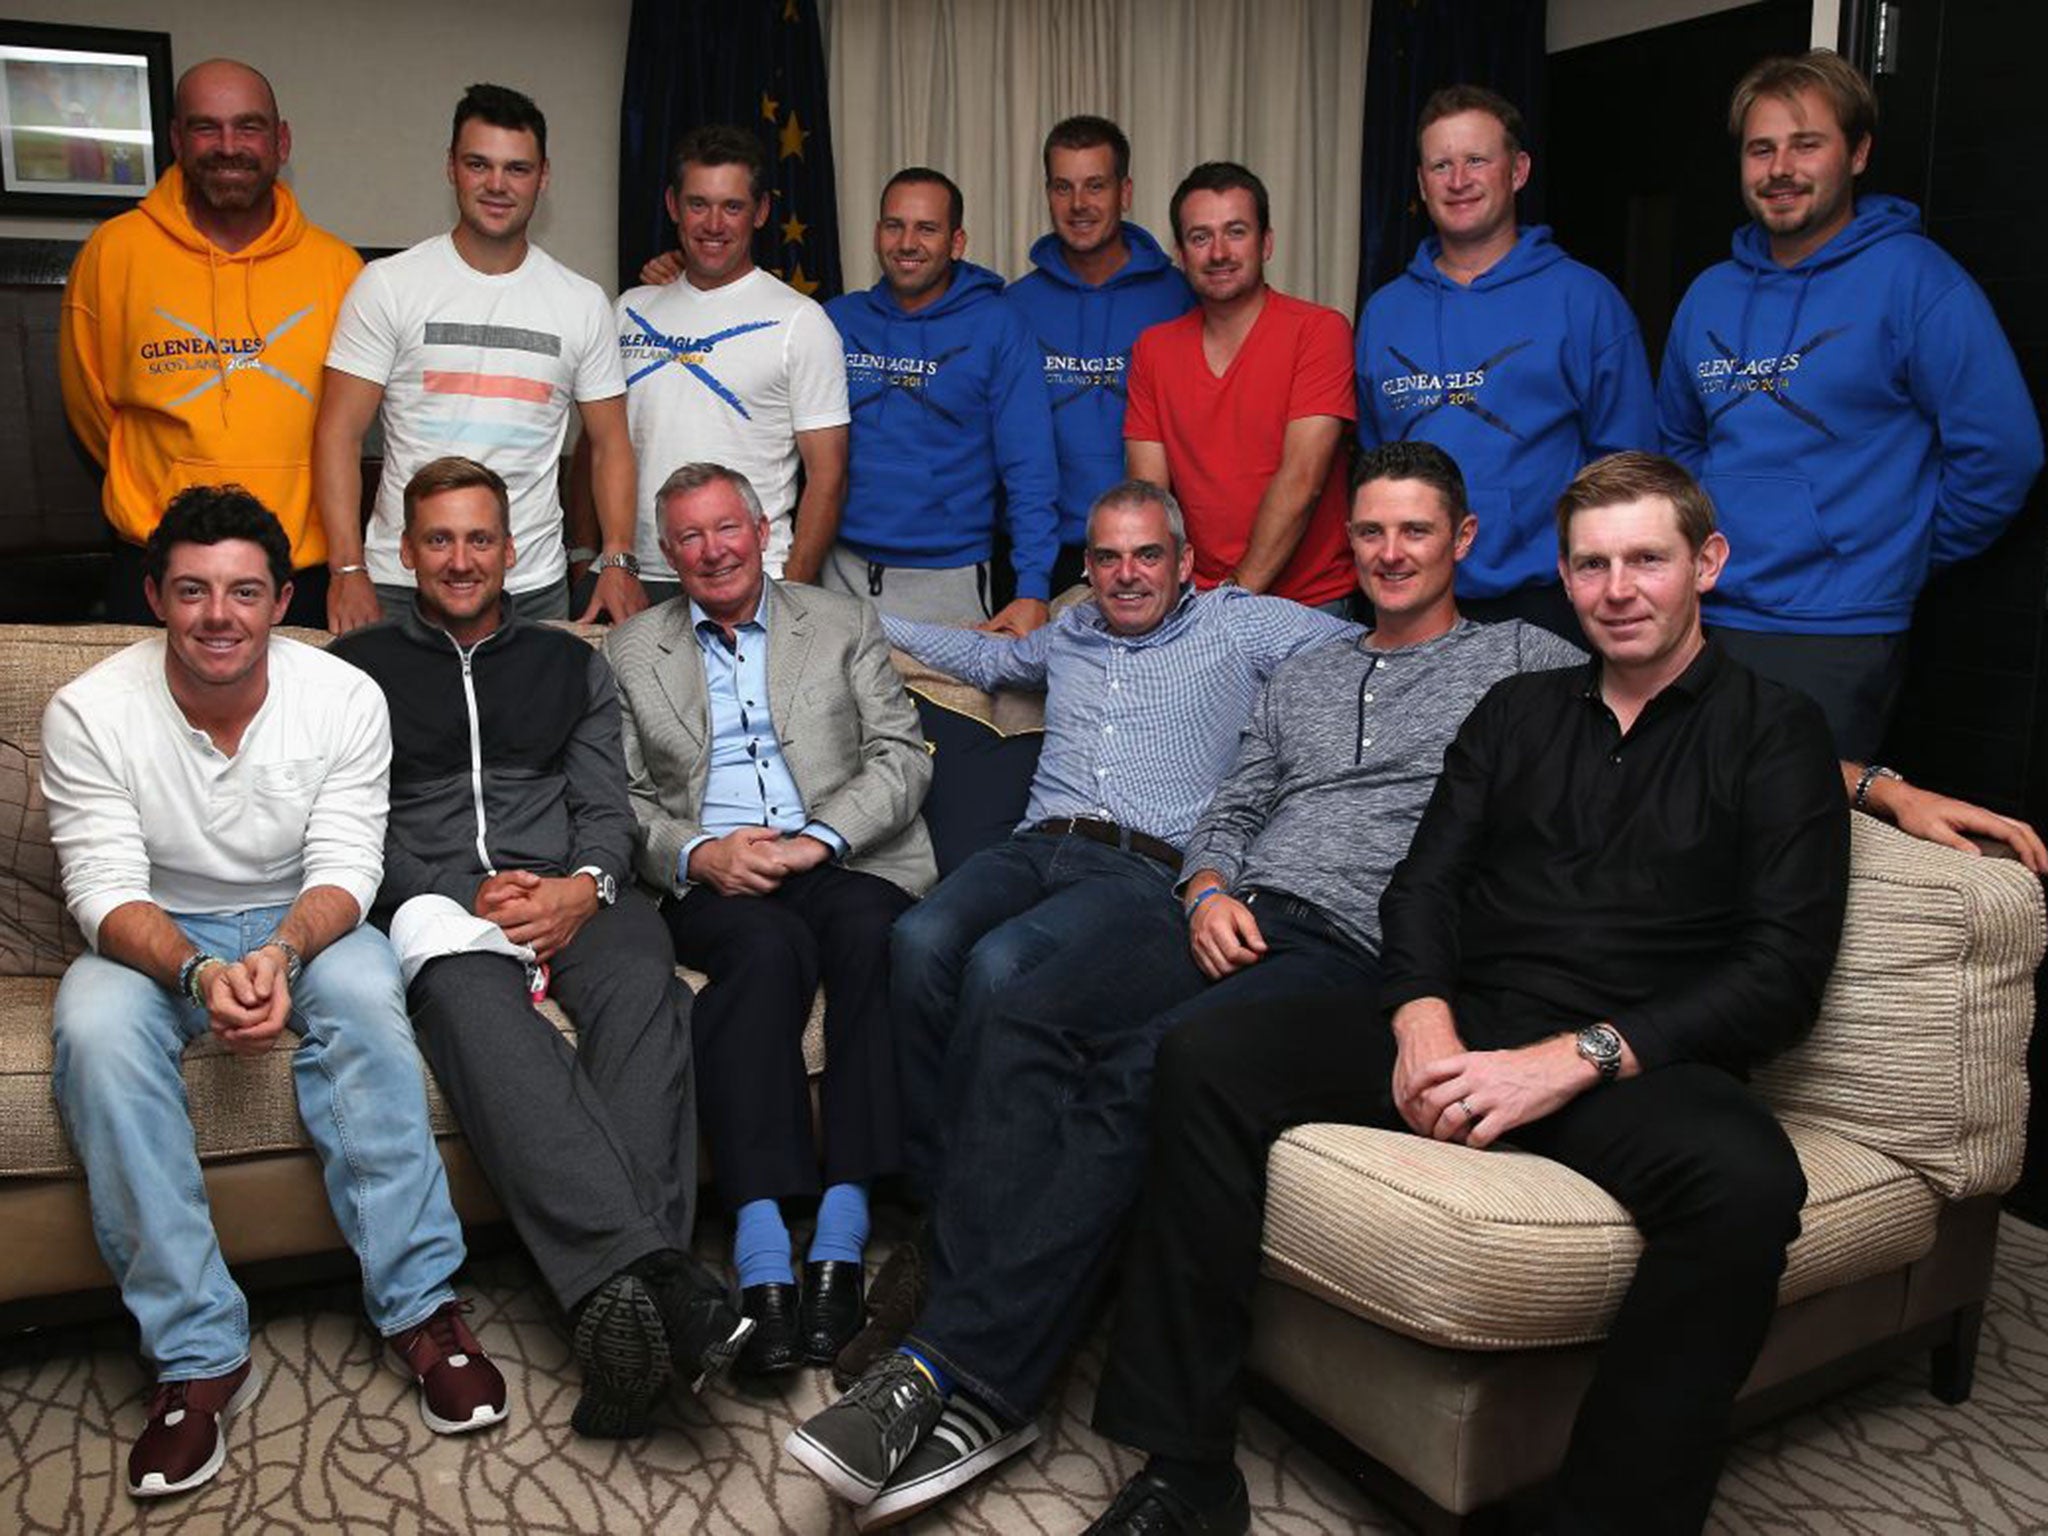 Sir Alex Ferguson with the European Ryder Cup team after his motivational pep talk: (left to right, front row): Rory McIlroy, Ian Poulter, Sir Alex Ferguson, Paul McGinley, Justin Rose, Stephen Gallacher and (back row) Thomas Bjorn, Martin Kaymer, Lee Wes